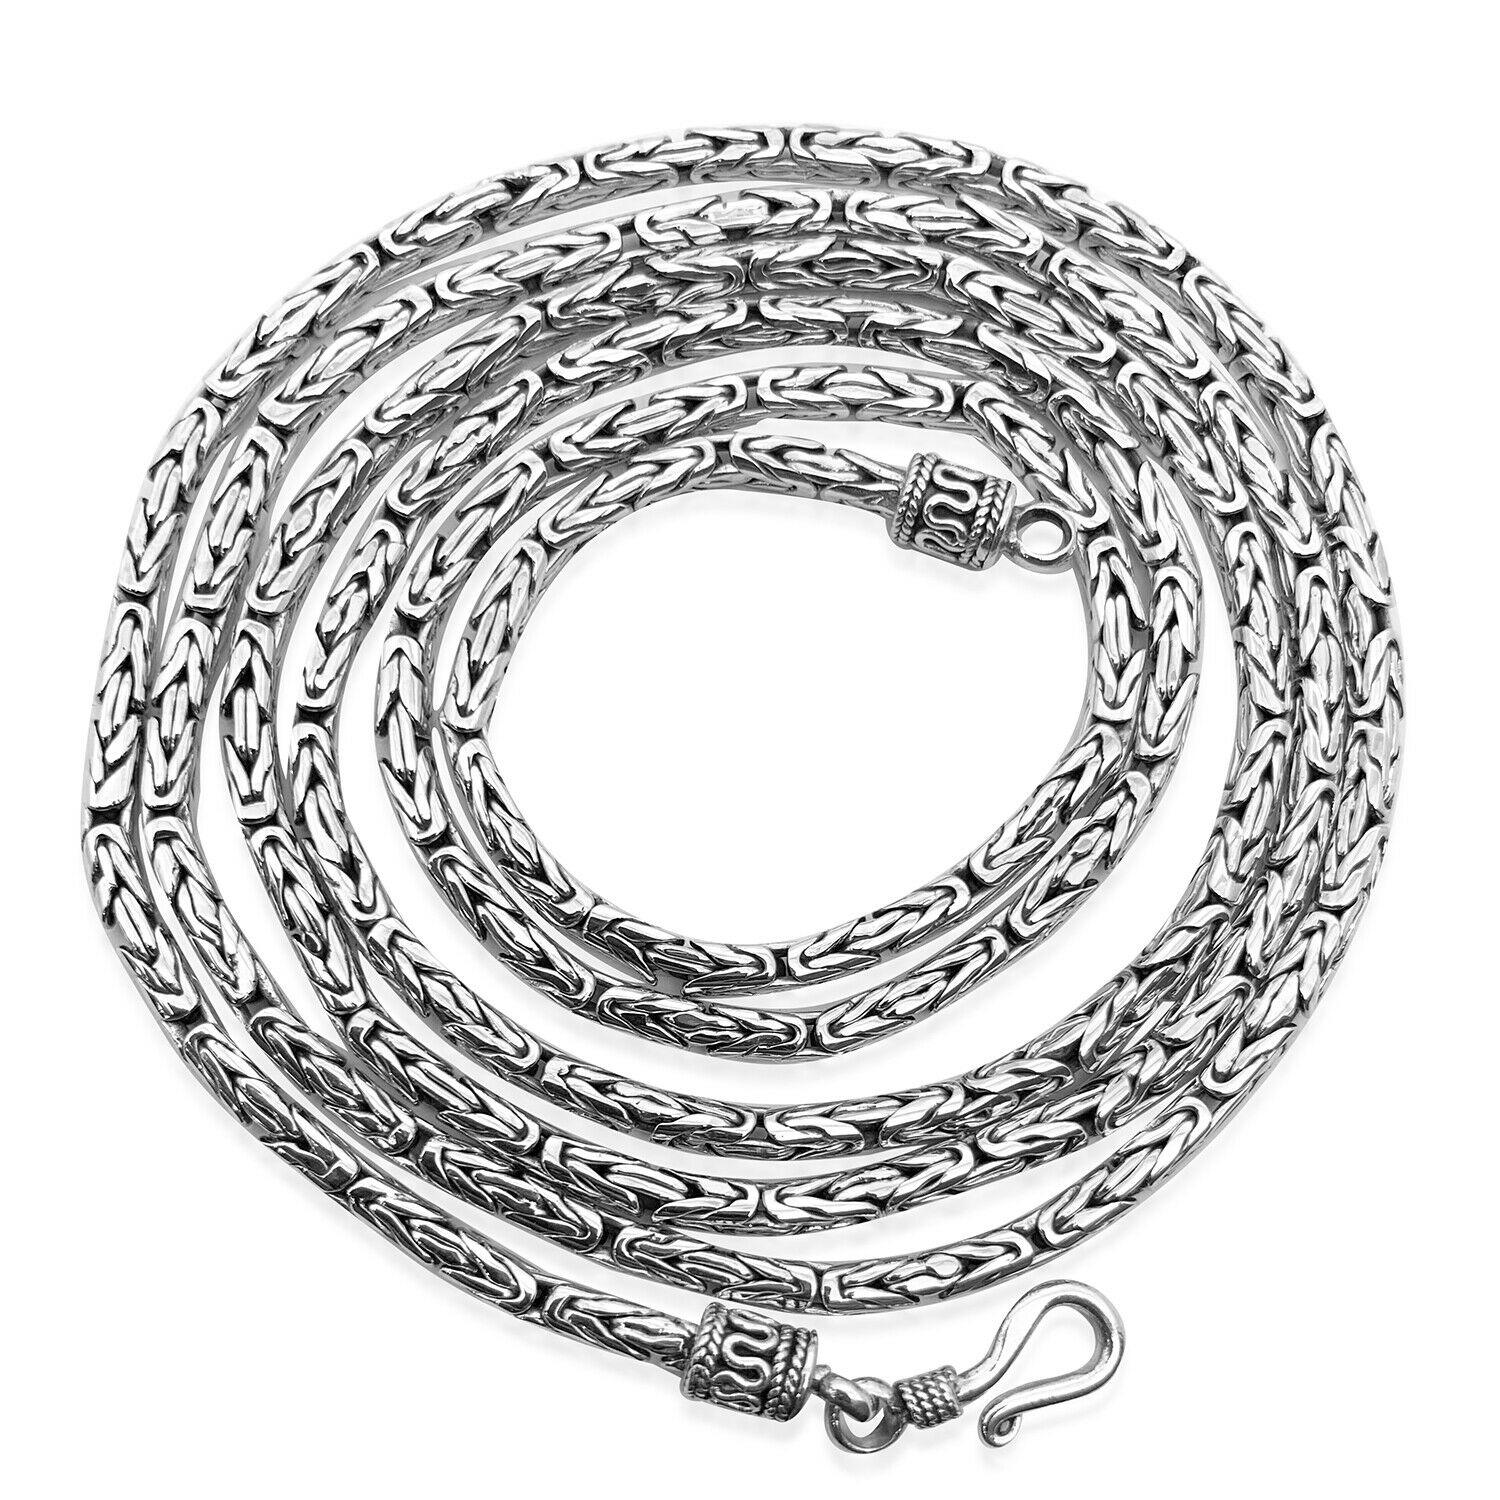 Handmade 2.5 mm Solid 925 Sterling Silver Balinese BYZANTINE Borobudur Link Chain Necklace Oxidized 18, 24, 30 and 36 inches - Inspiring Jewellery